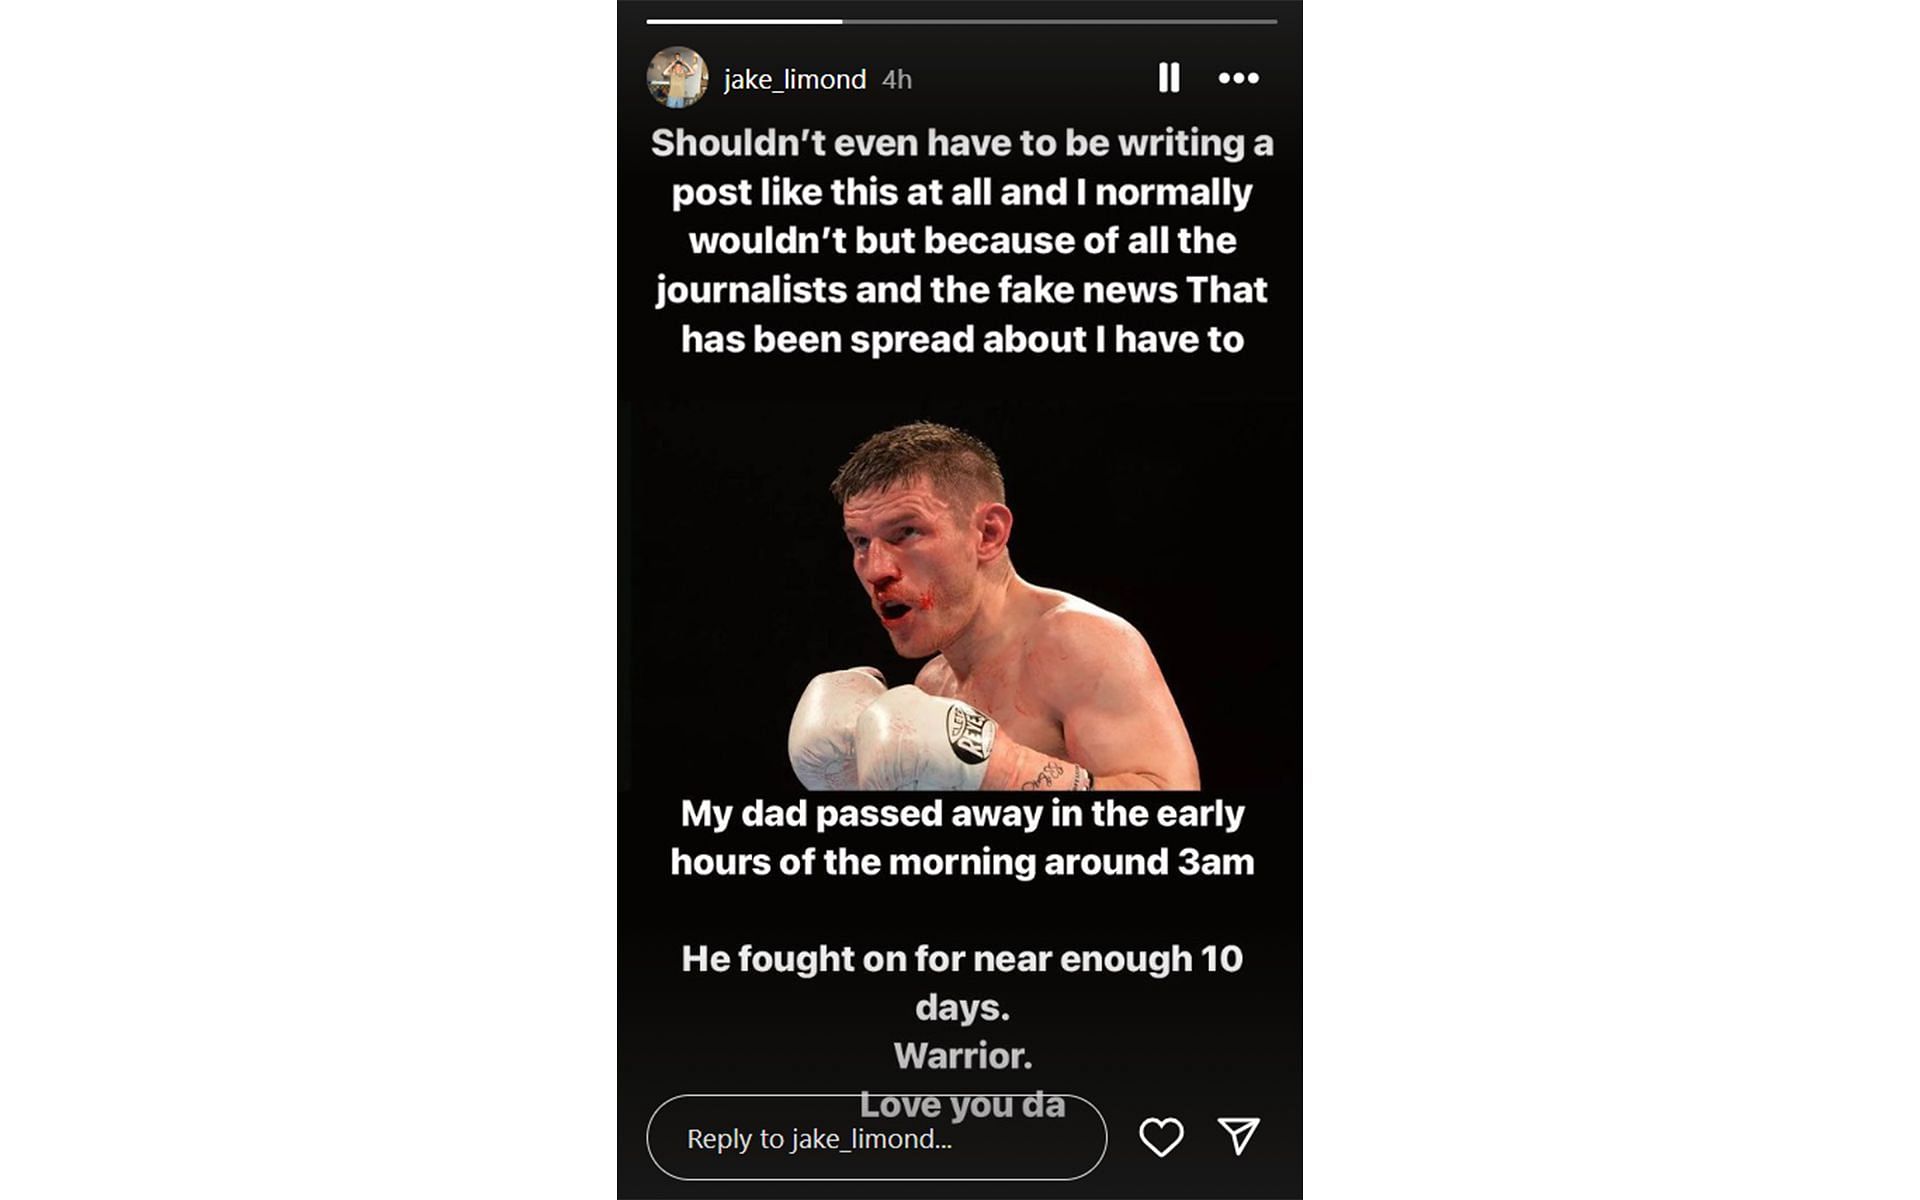 Willie Limond&#039;s son broke the news of his passing [Image Courtesy: @jake_limond Instagram]